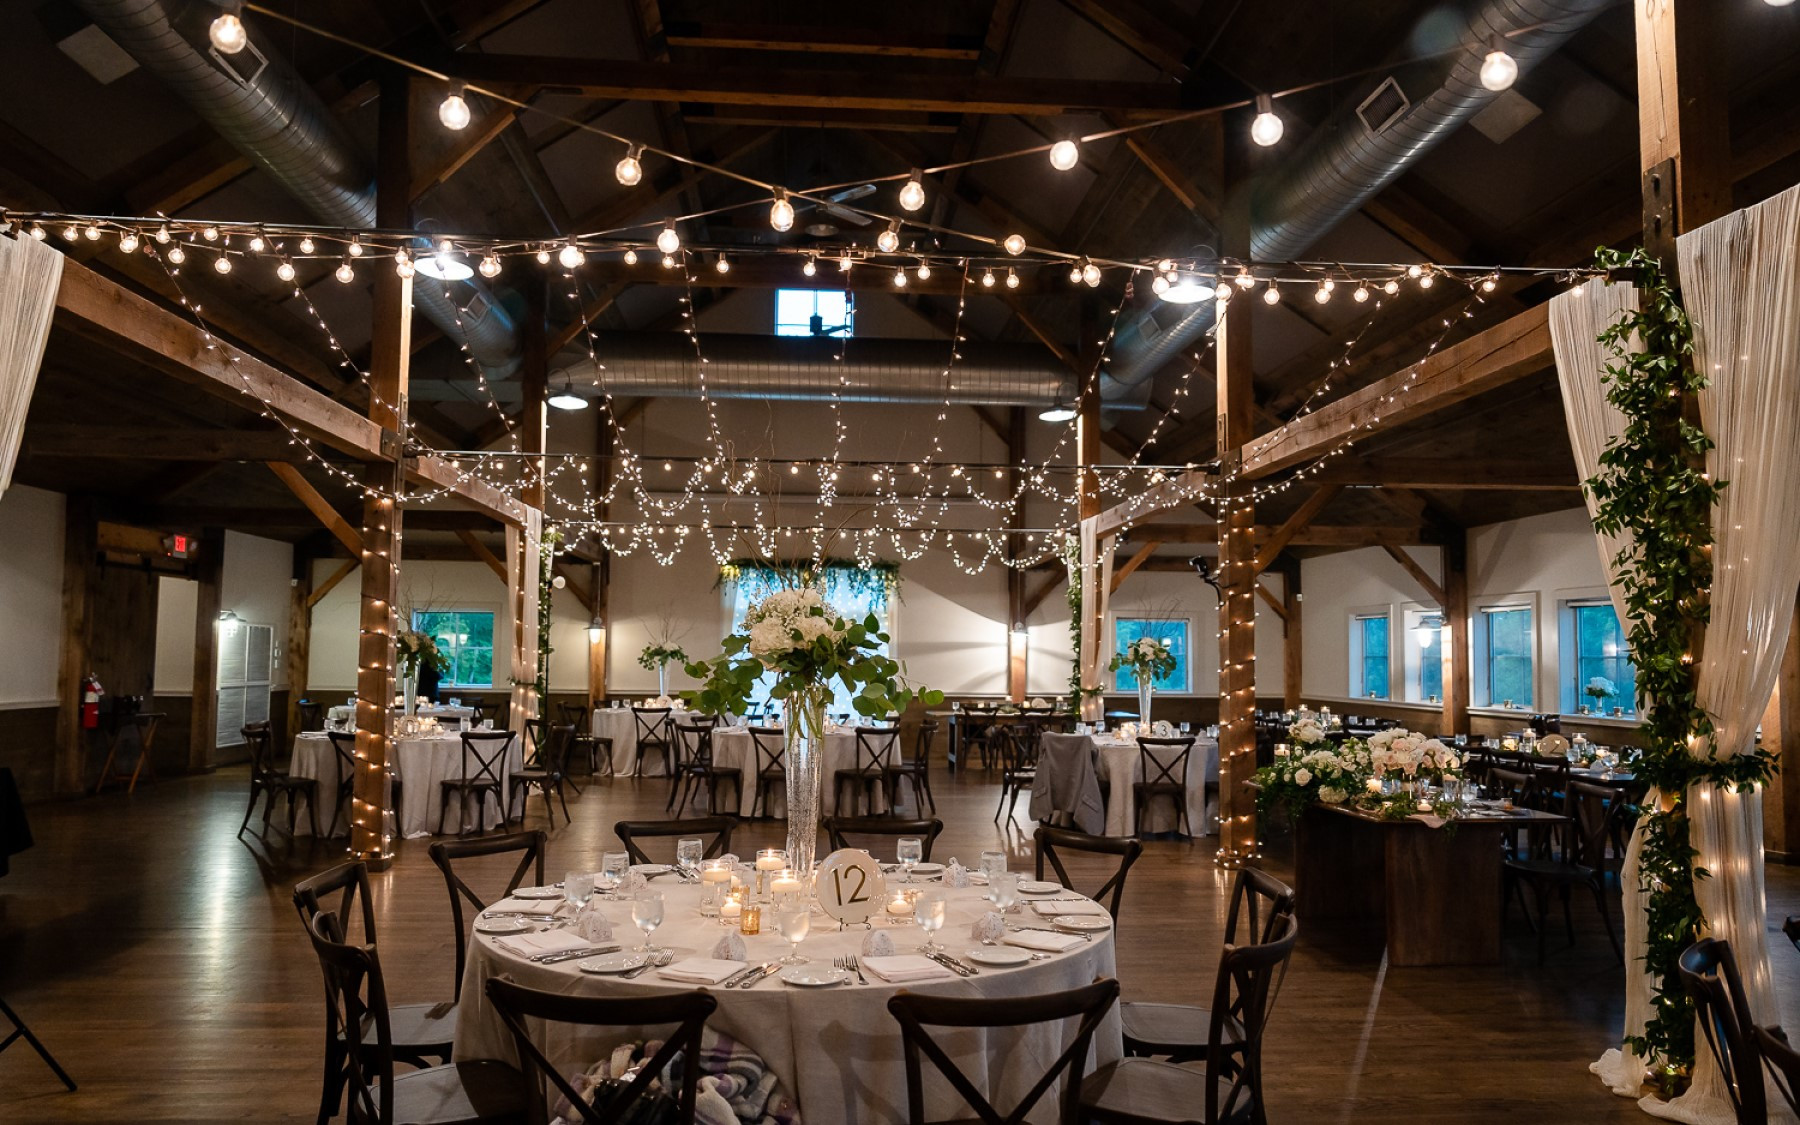 event barn with decor for a wedding reception.